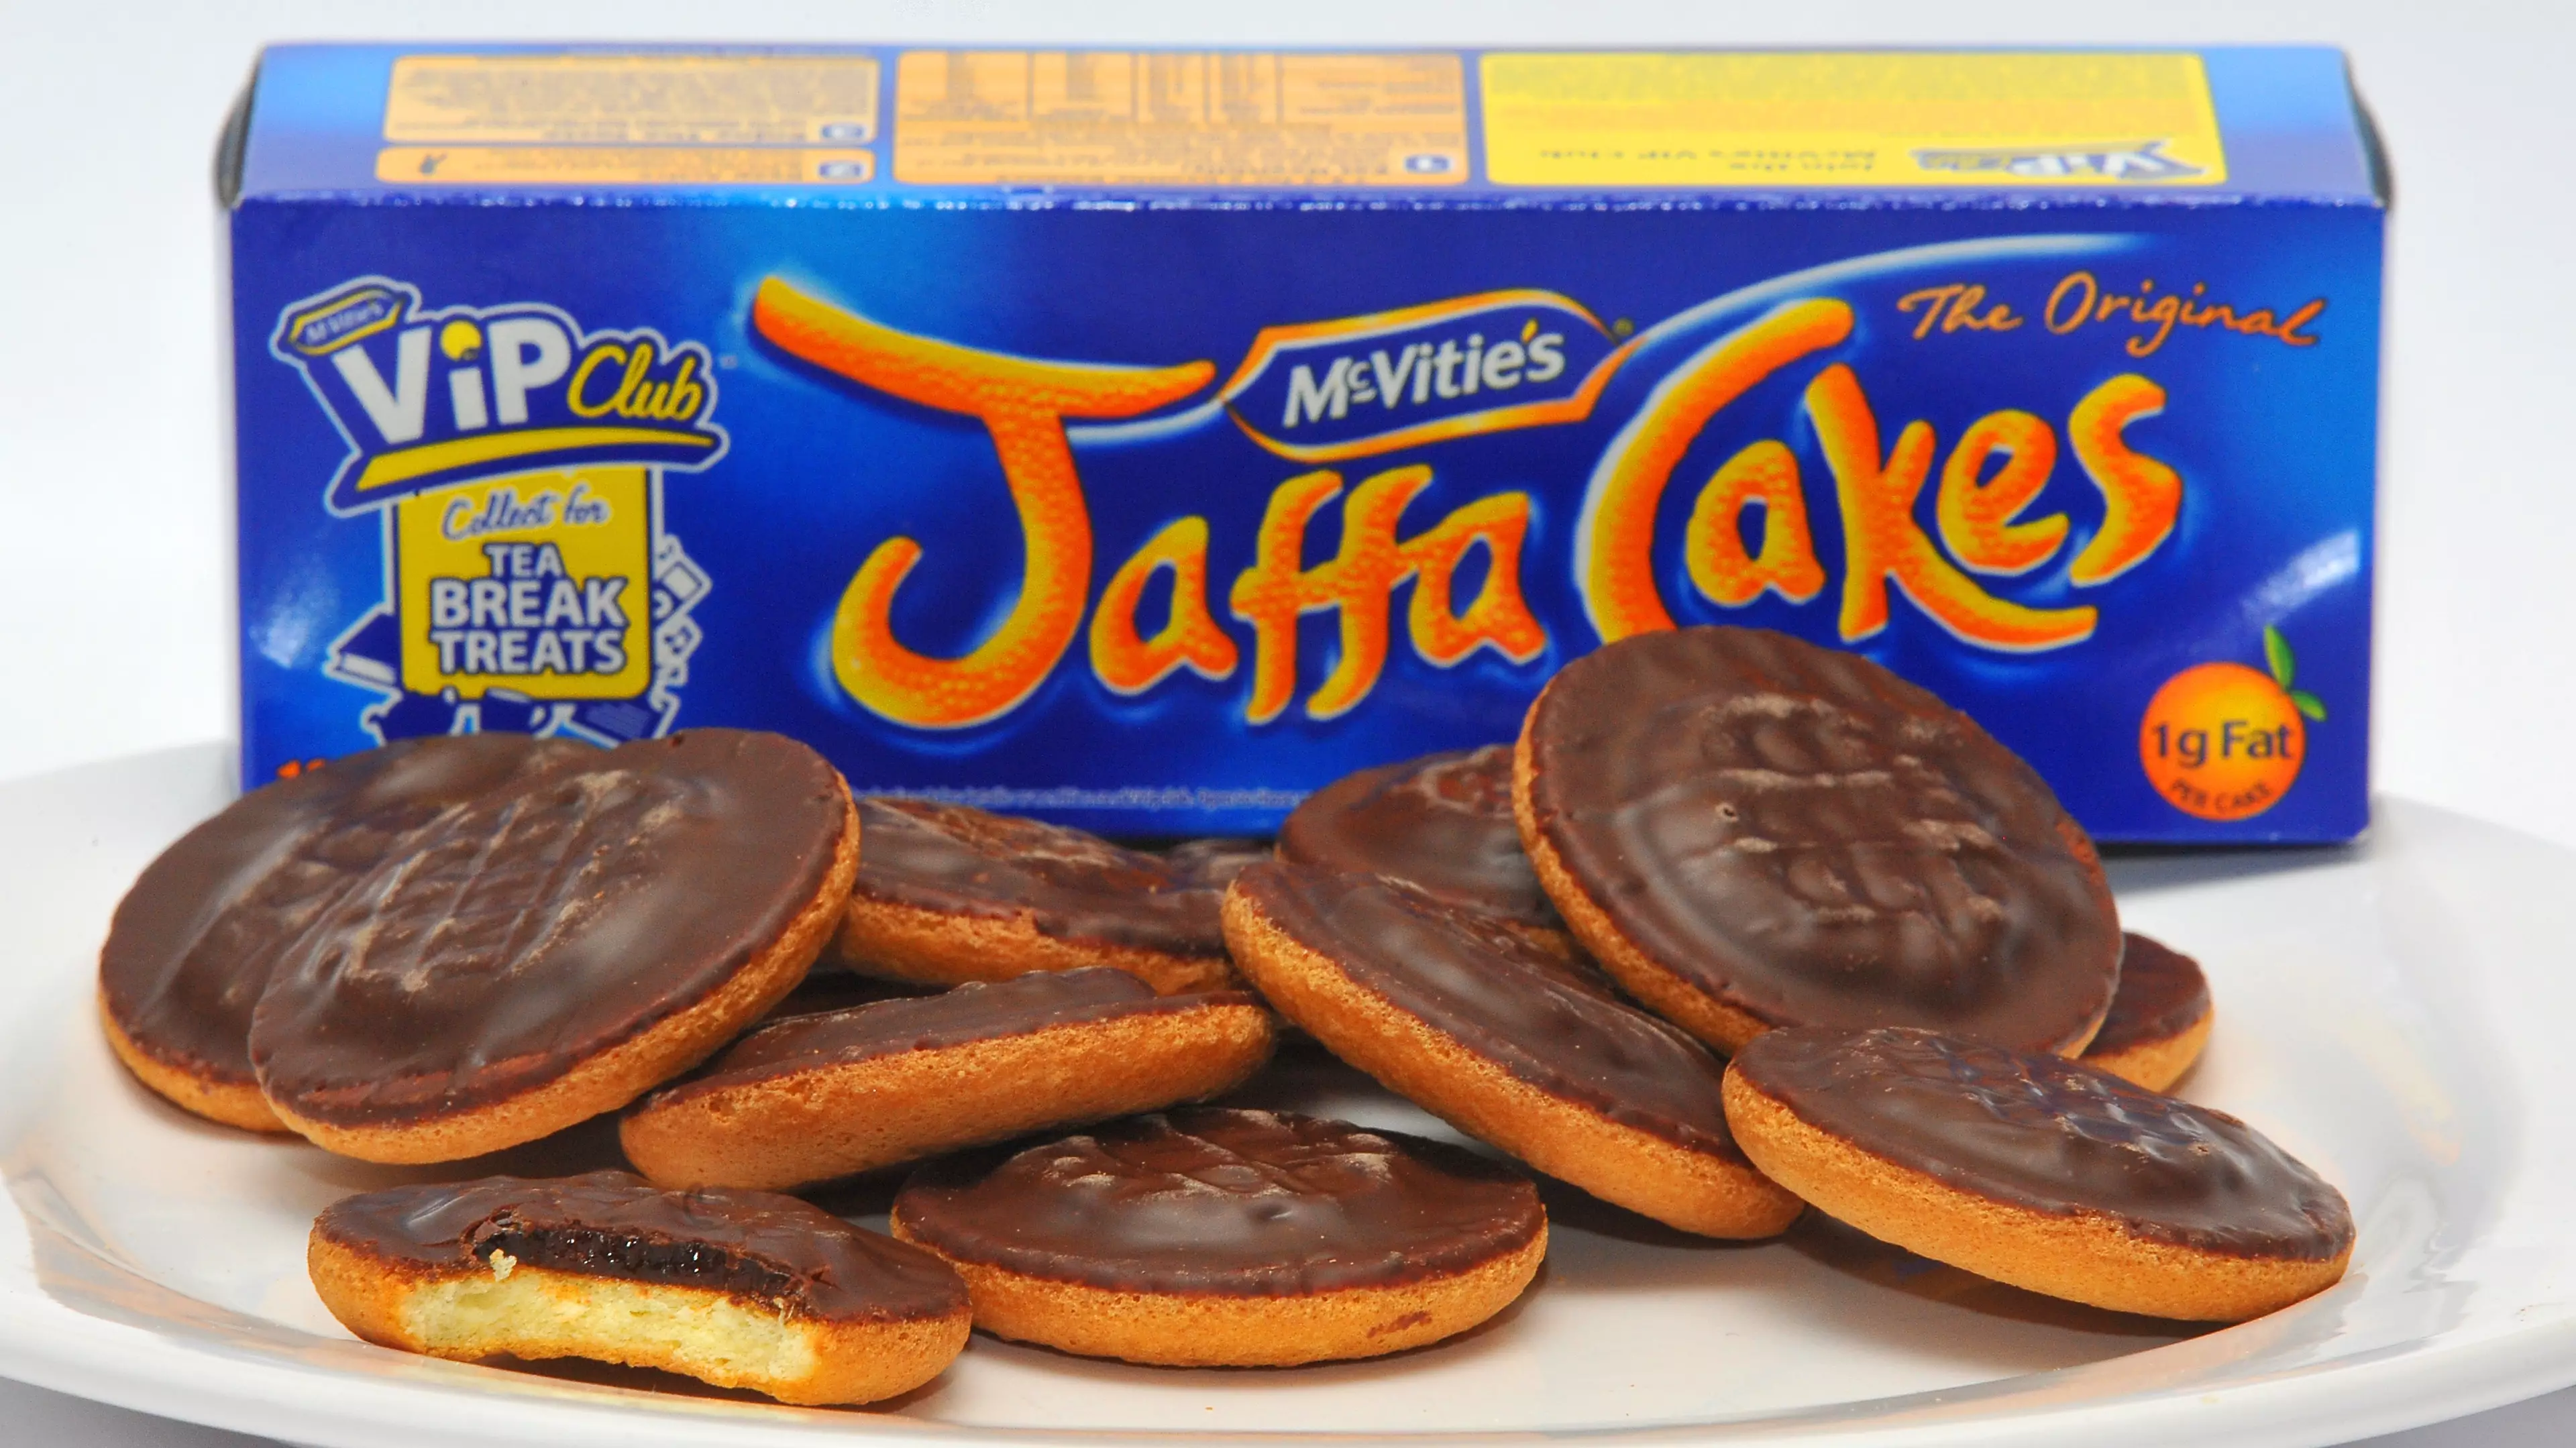 Home Bargains Is Selling Giant Boxes Of Jaffa Cakes For £4